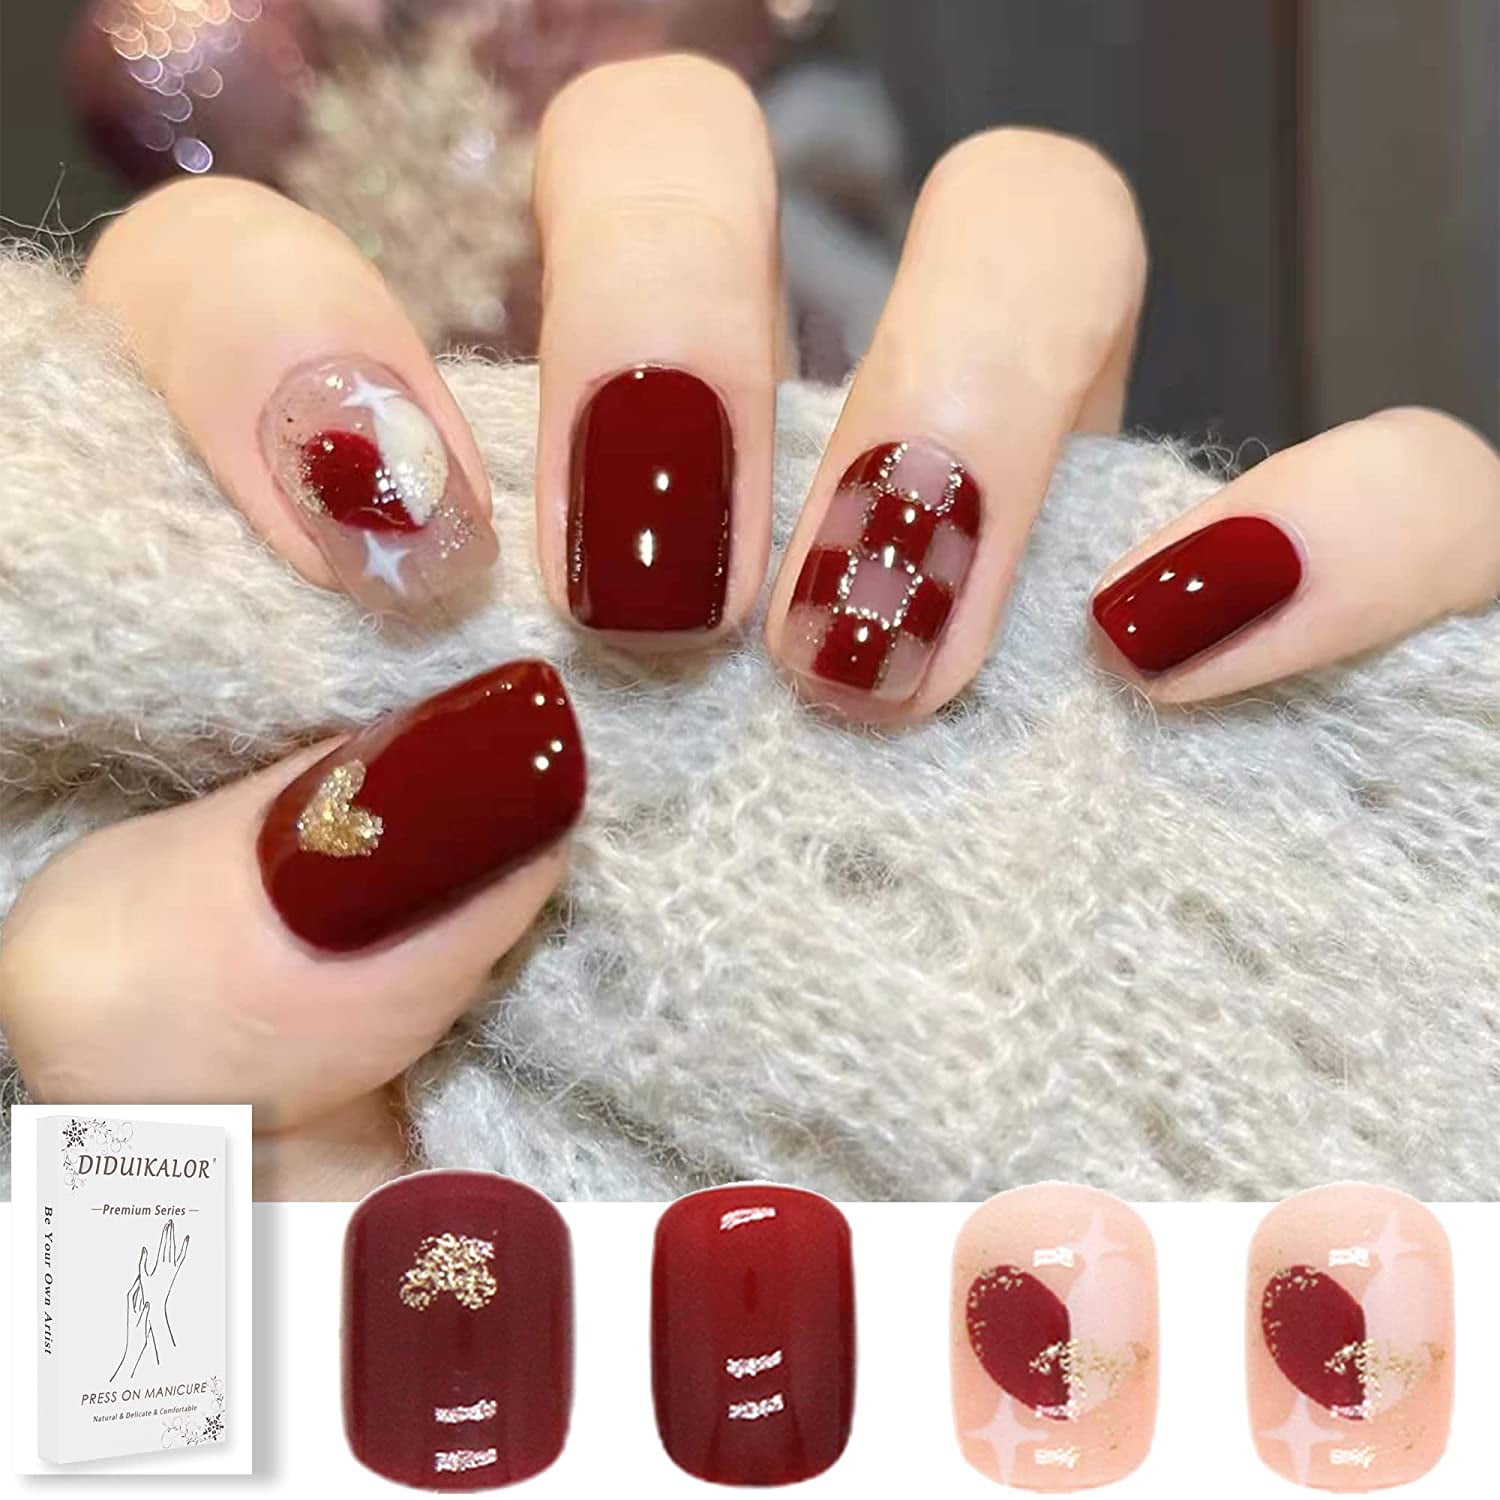 Square Press On Nails Short Oval, Red Color Heart Fake Nails with Nail Glue  and Jelly Gel, Acrylic False Nails for Women Girls Trendy Luxury Charms uñas  acrilicas con diseños decoradas 